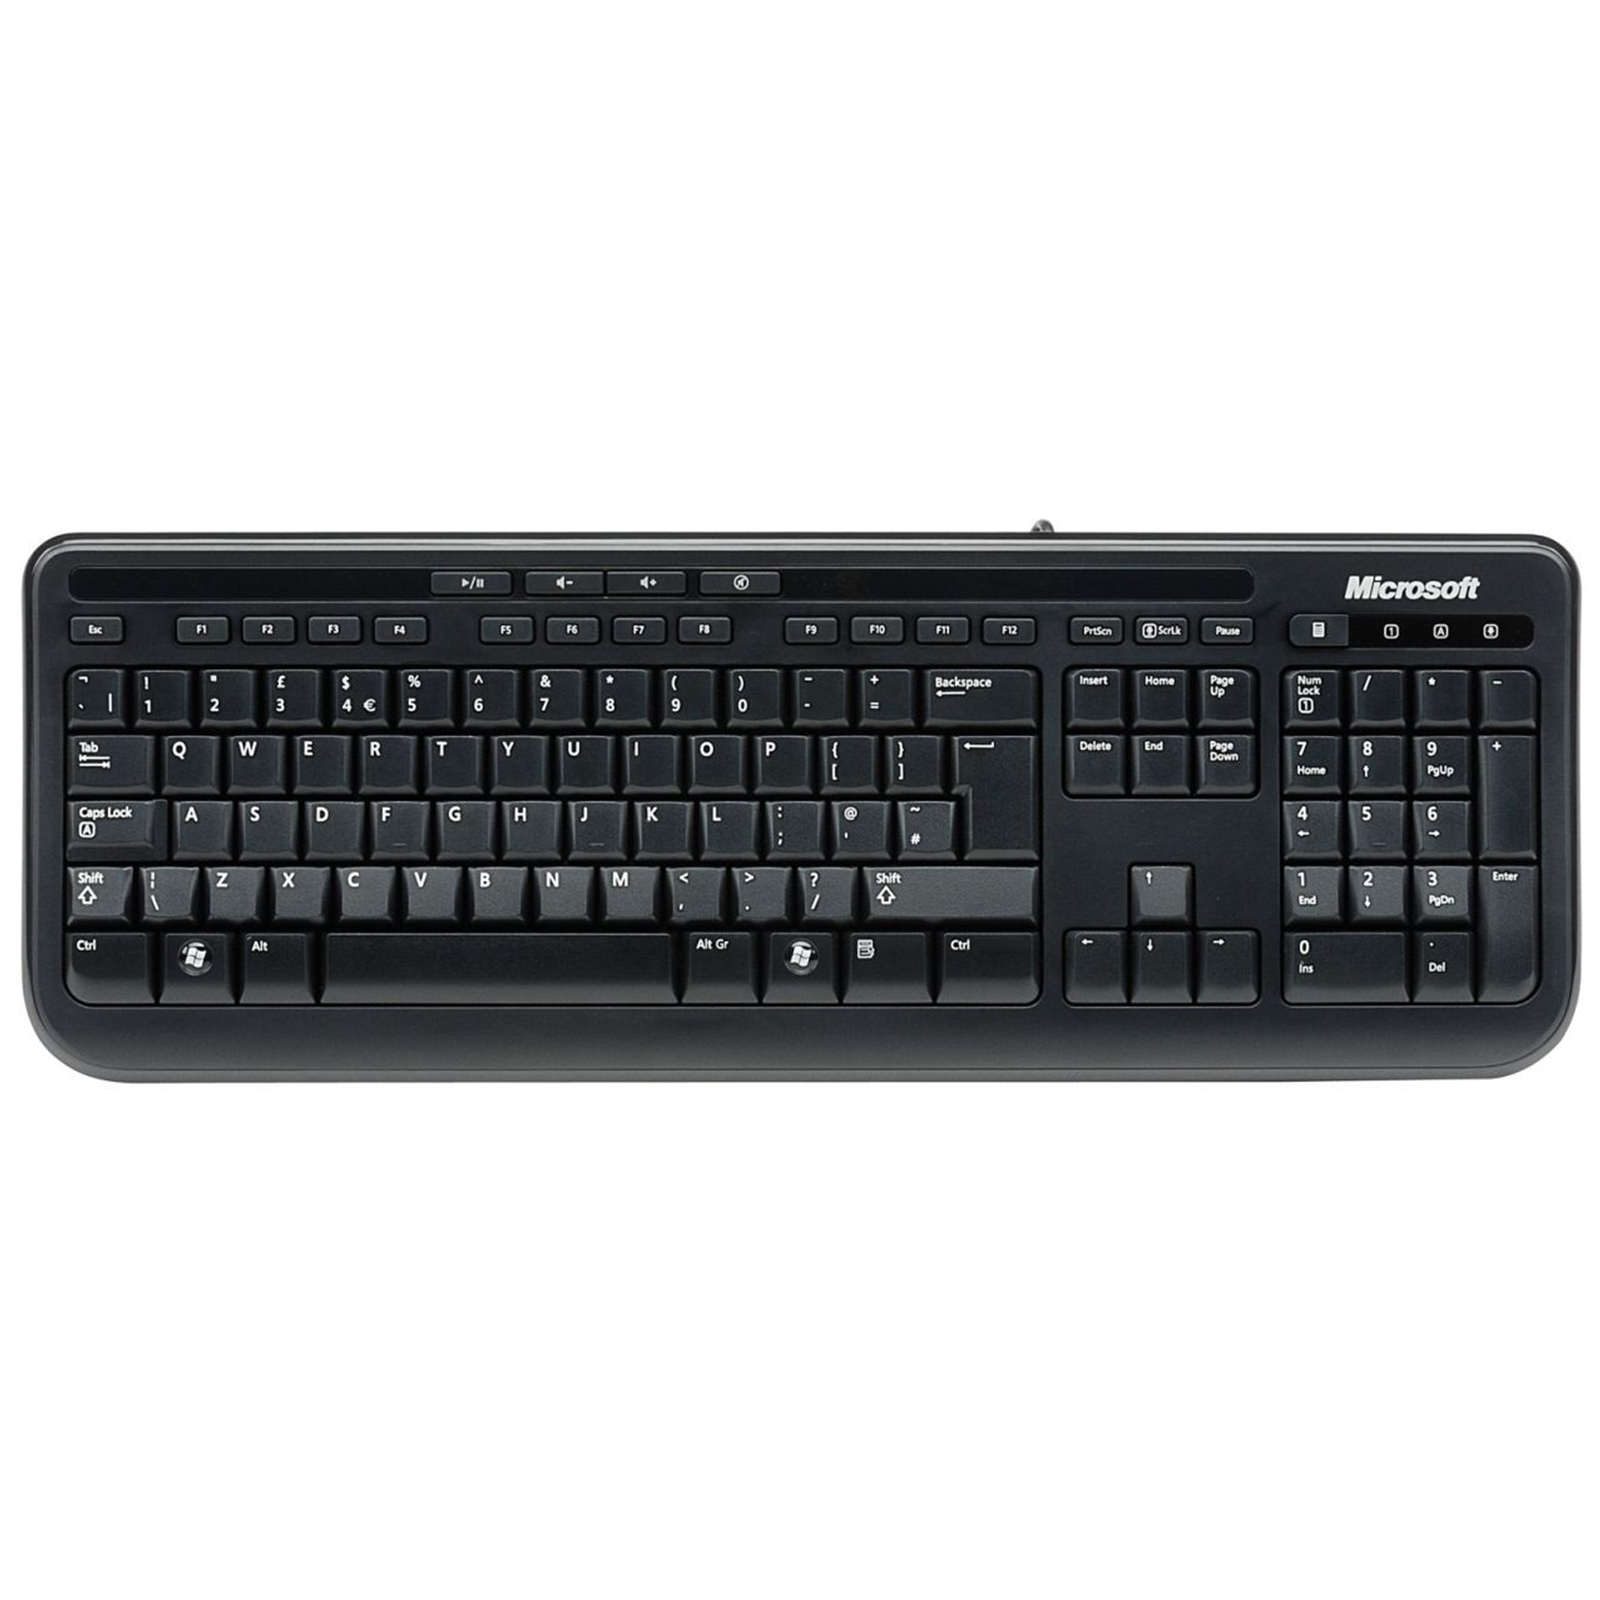 Microsoft 600 Wired Keyboard, USB Plug-and-Play, Full-Size, Spill-Resistant, Quiet-touch Keys, Compatible with Windows, Mac and Android, QWERTY UK English Layout, Black